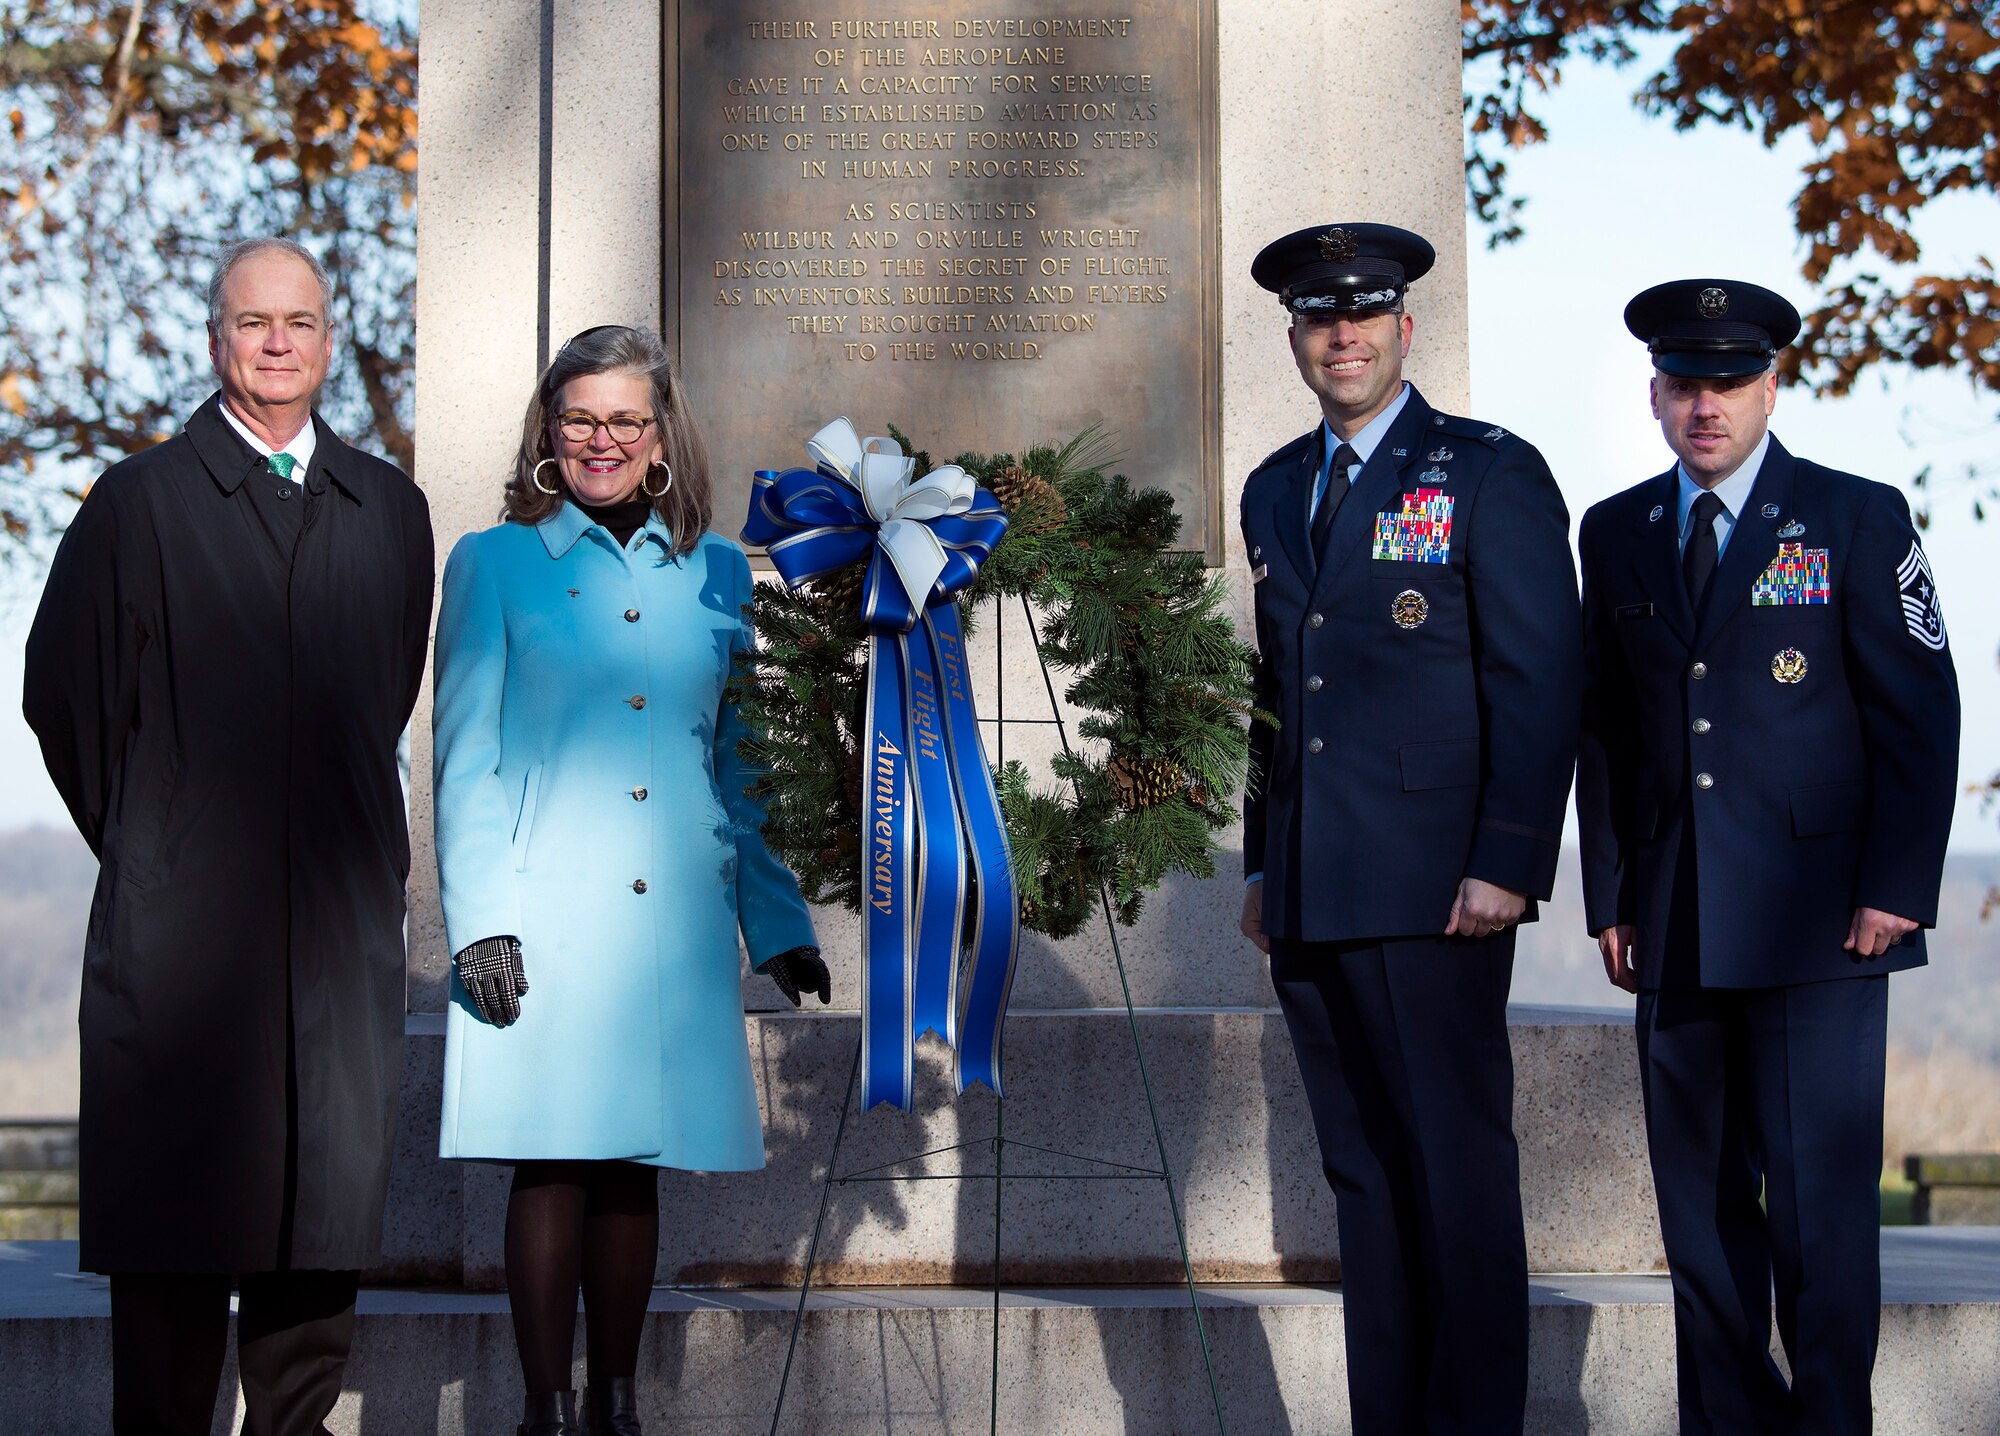 Wright family members Stephen Wright and Amanda Wright Lane join Col. Thomas P. Sherman, 88th Air Base Wing and installation commander, and Chief Master Sgt. Stephen A. Arbona, 88th ABW command chief, in laying a wreath at the Wright Brothers Memorial on Wright-Patterson Air Force  Base, Ohio, Dec. 17, 2018.